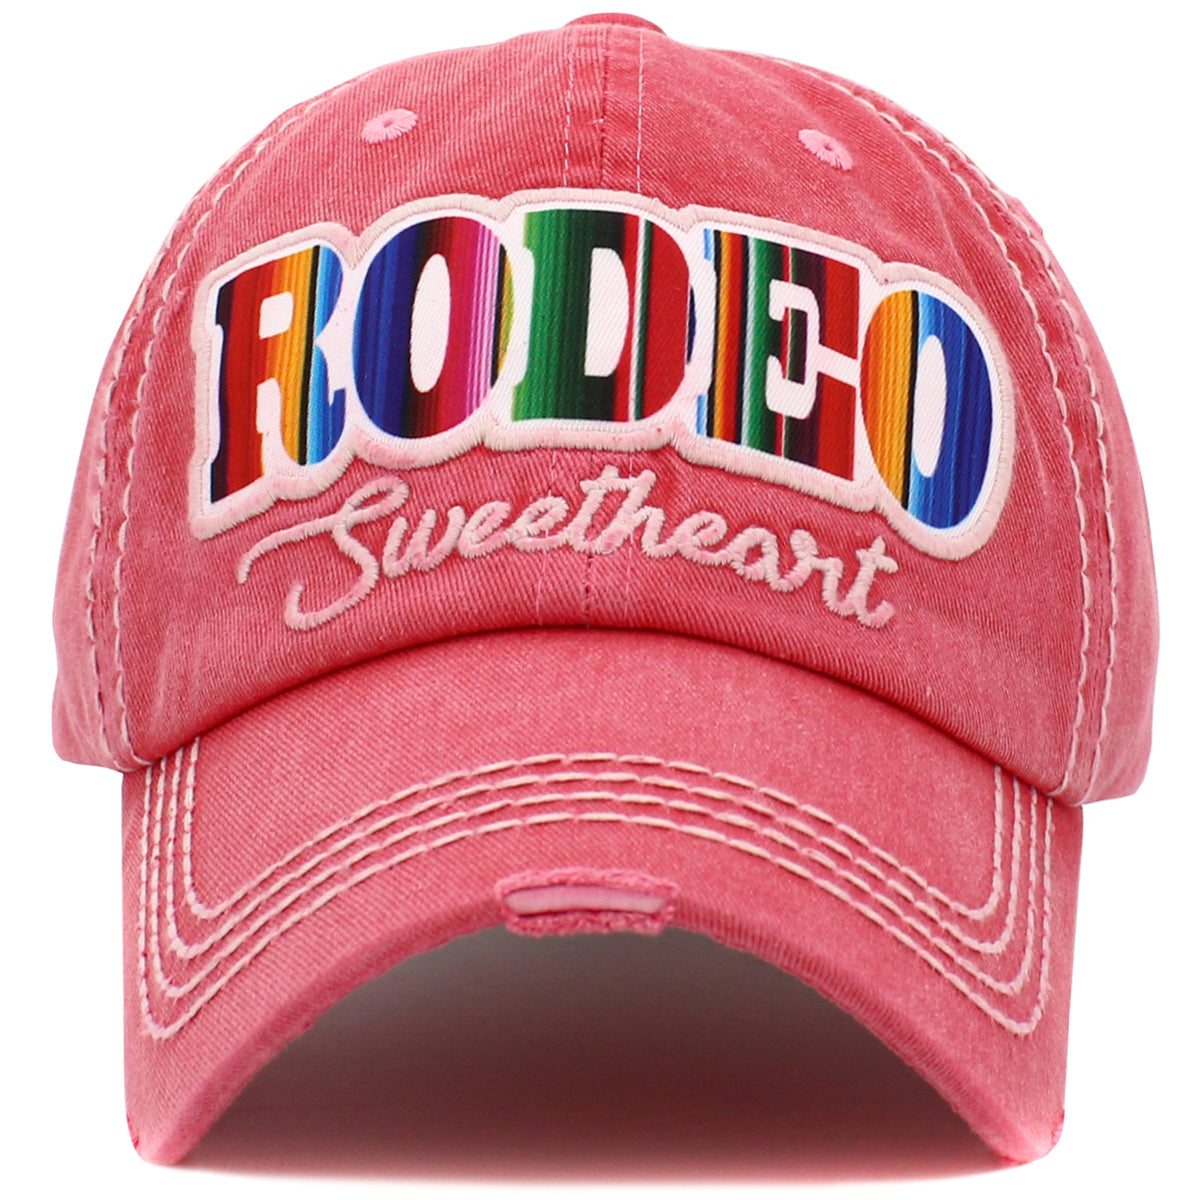 1518 - Rodeo Sweetheart Hat - Hot Pink